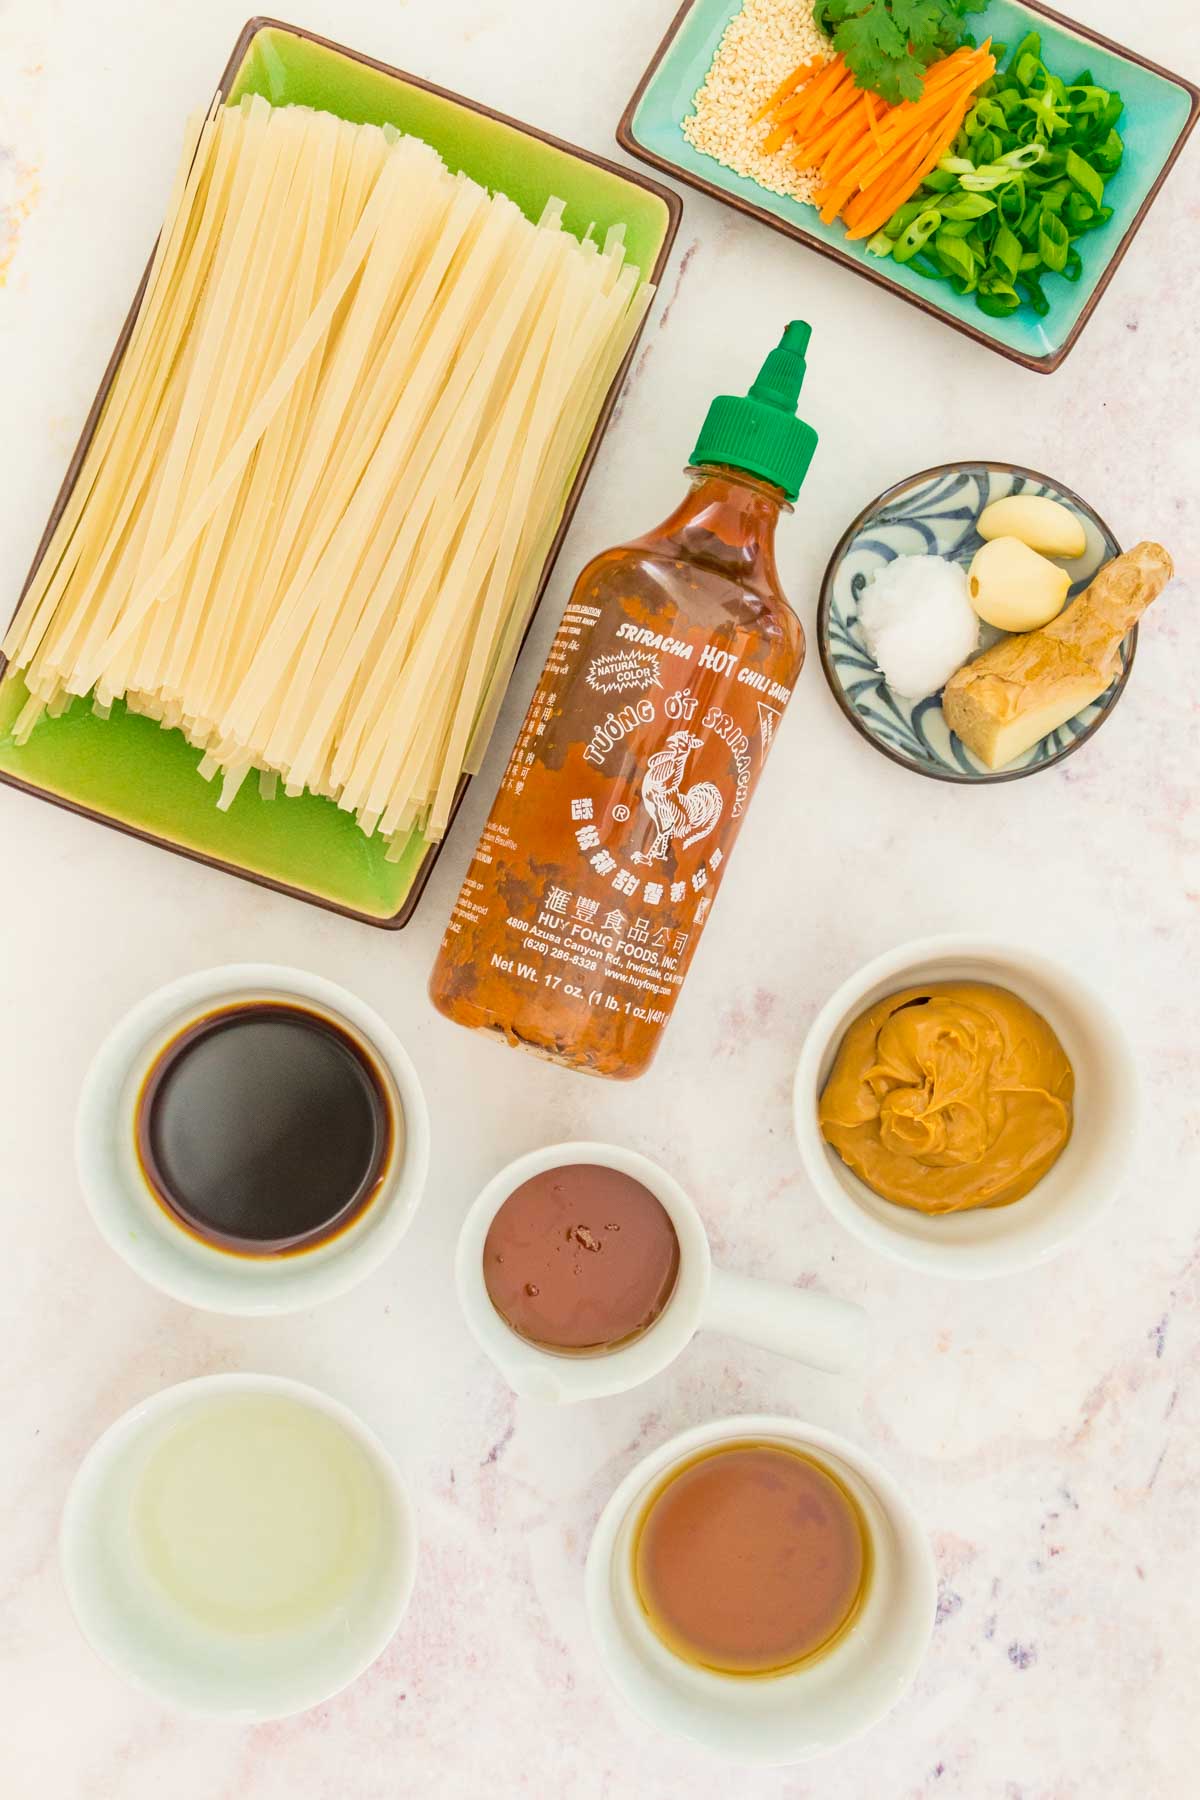 All of the ingredients for Spicy Sesame Noodles laid out on the counter.